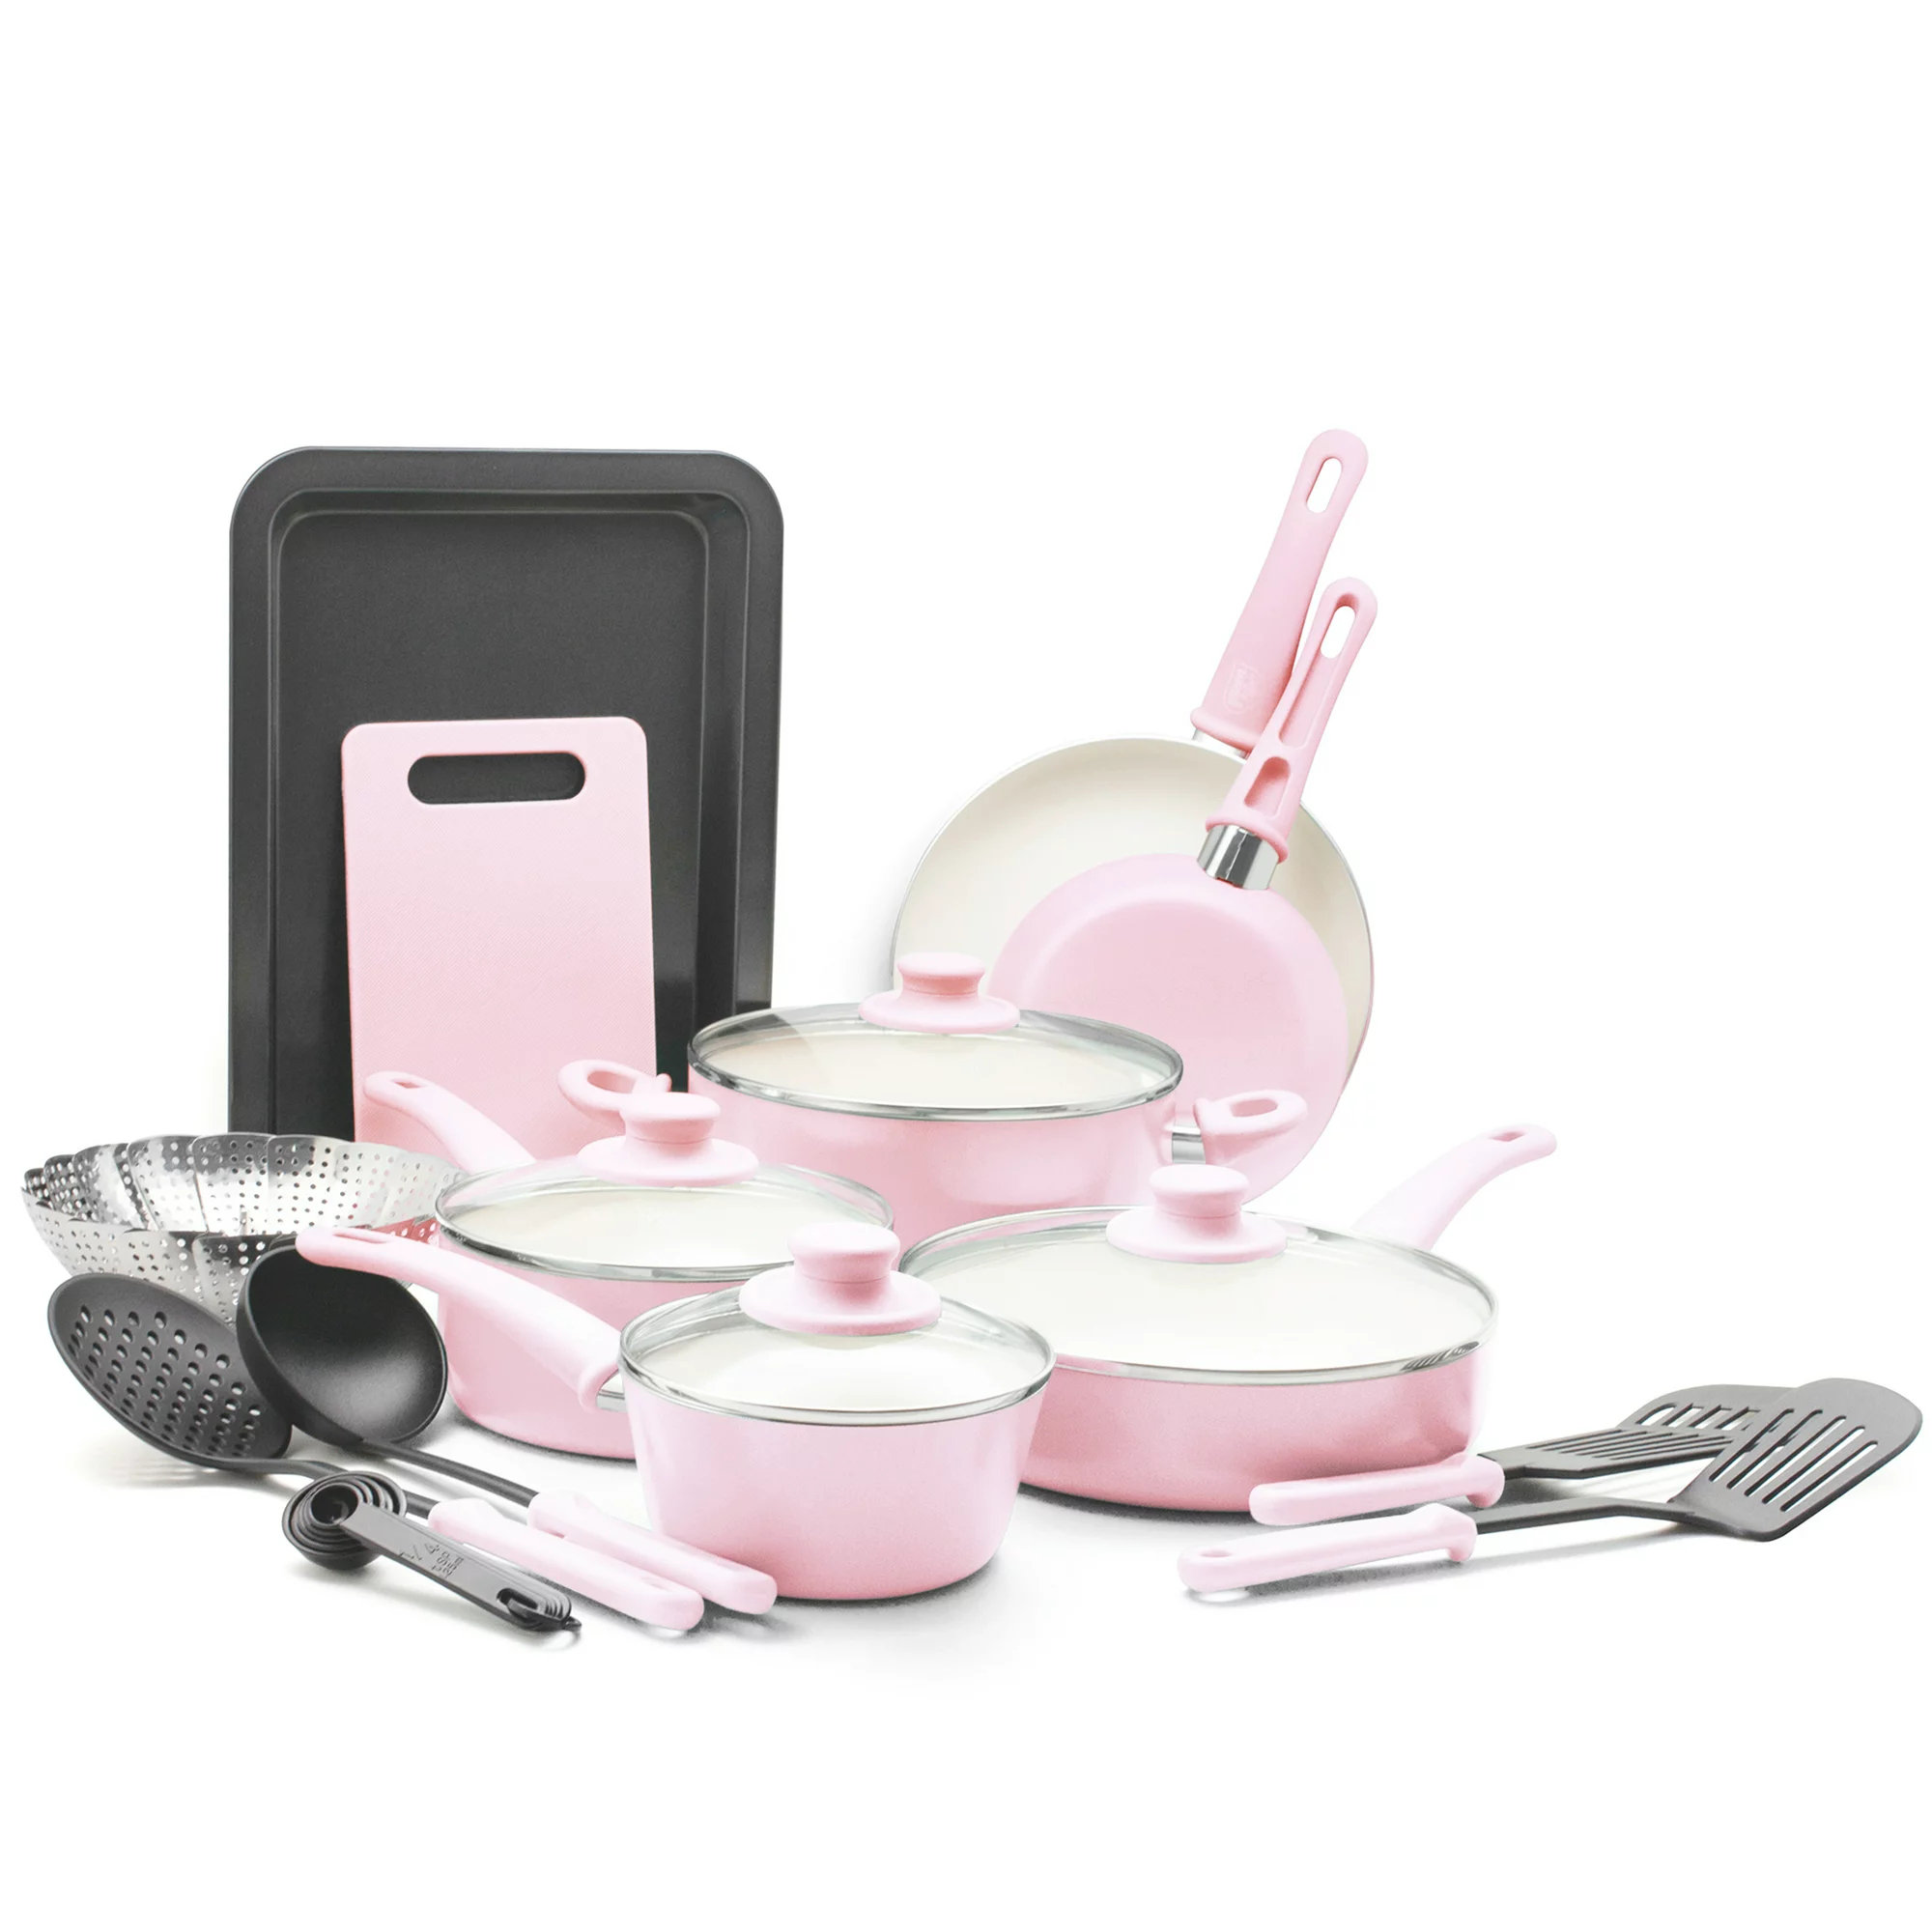 Healthy Non-Toxic Nonstick Cookware Sets - Soft Grip 23-Piece Cookware Set in Pink - by GreenLife